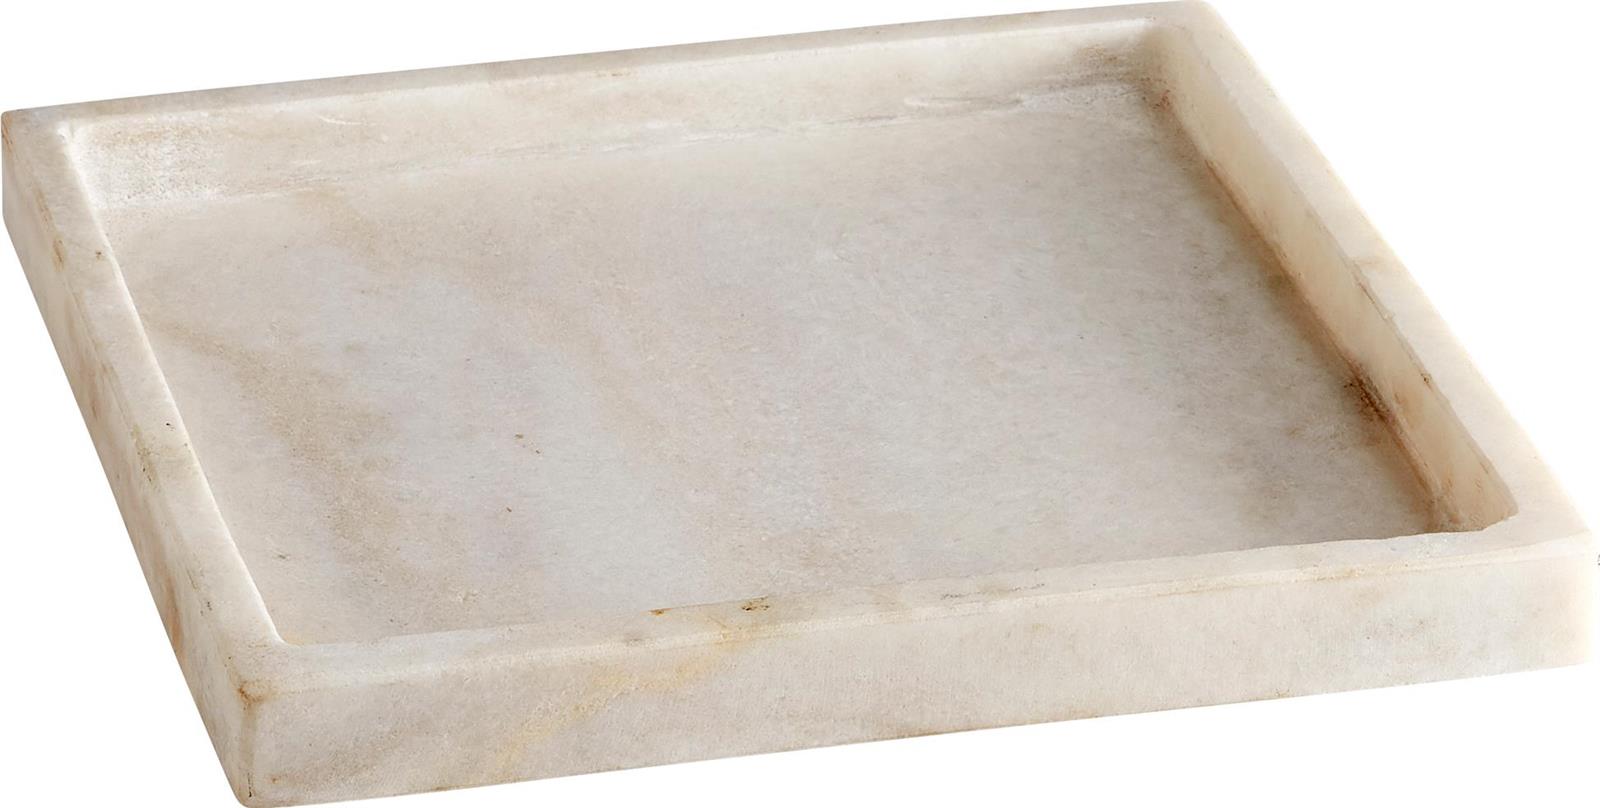 Tray CYAN DESIGN BIANCASTRA White Marble-Image 1